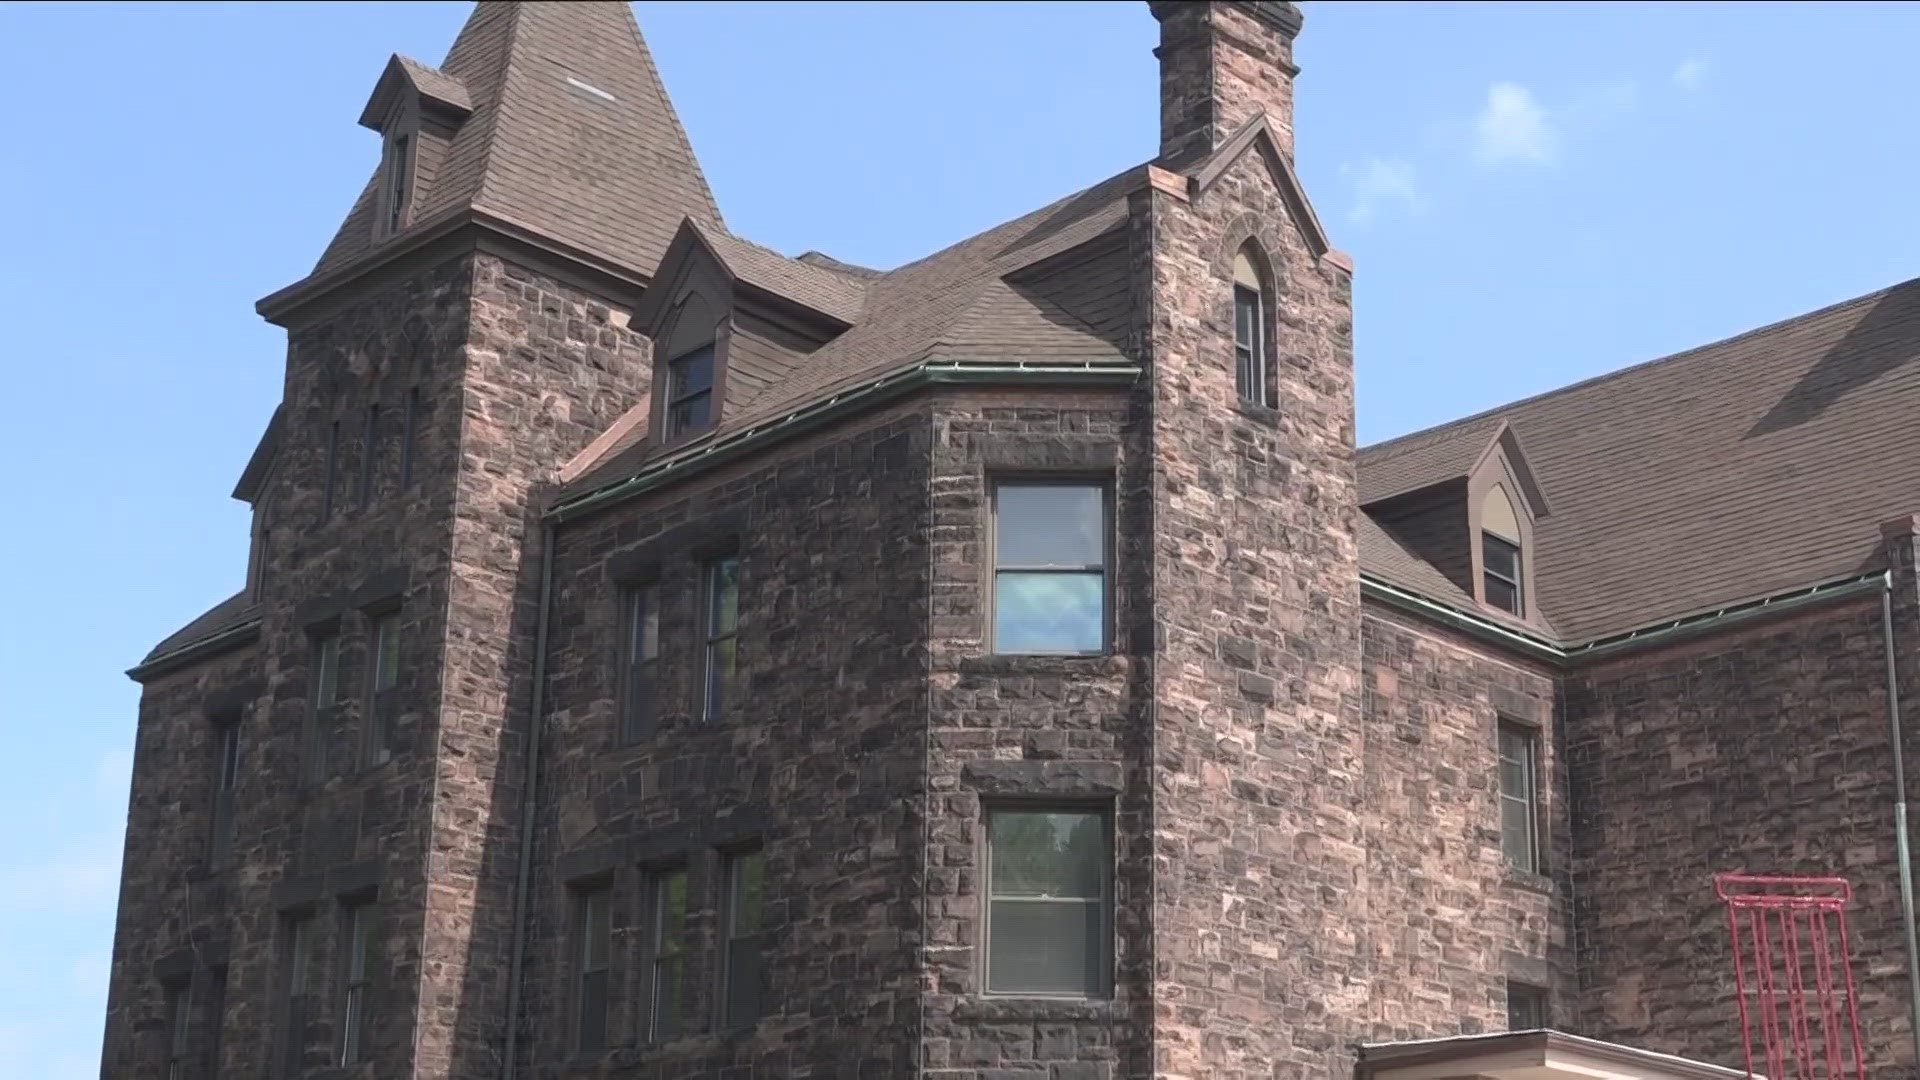 The Junior League of Buffalo selected the former home of the St. Patrick's Friary on Seymour Street for this year's fundraiser.